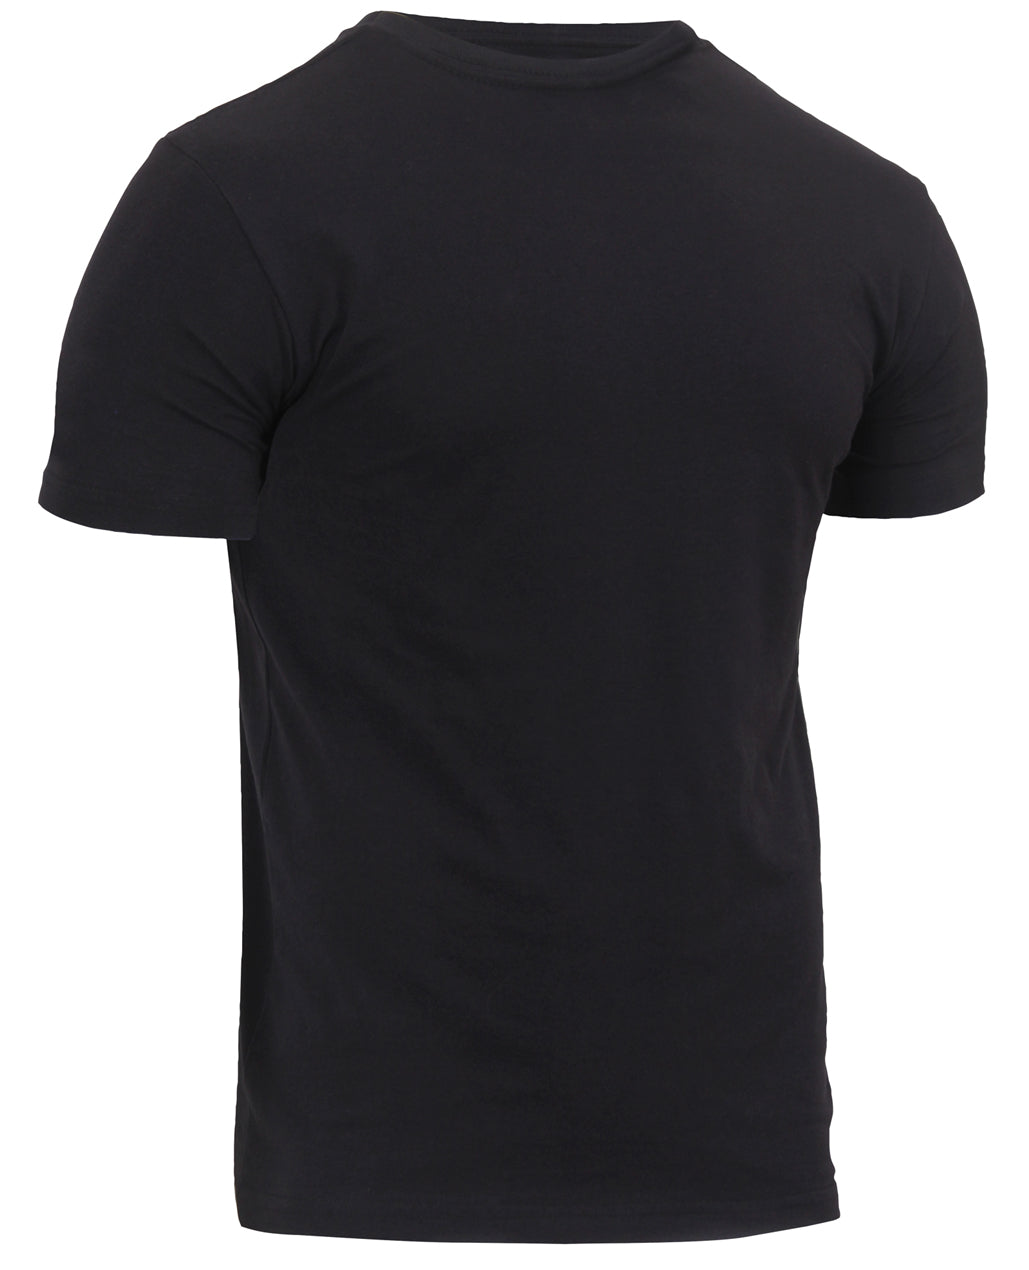 [AR 670-1] Poly/Cotton Athletic Fit T-Shirts